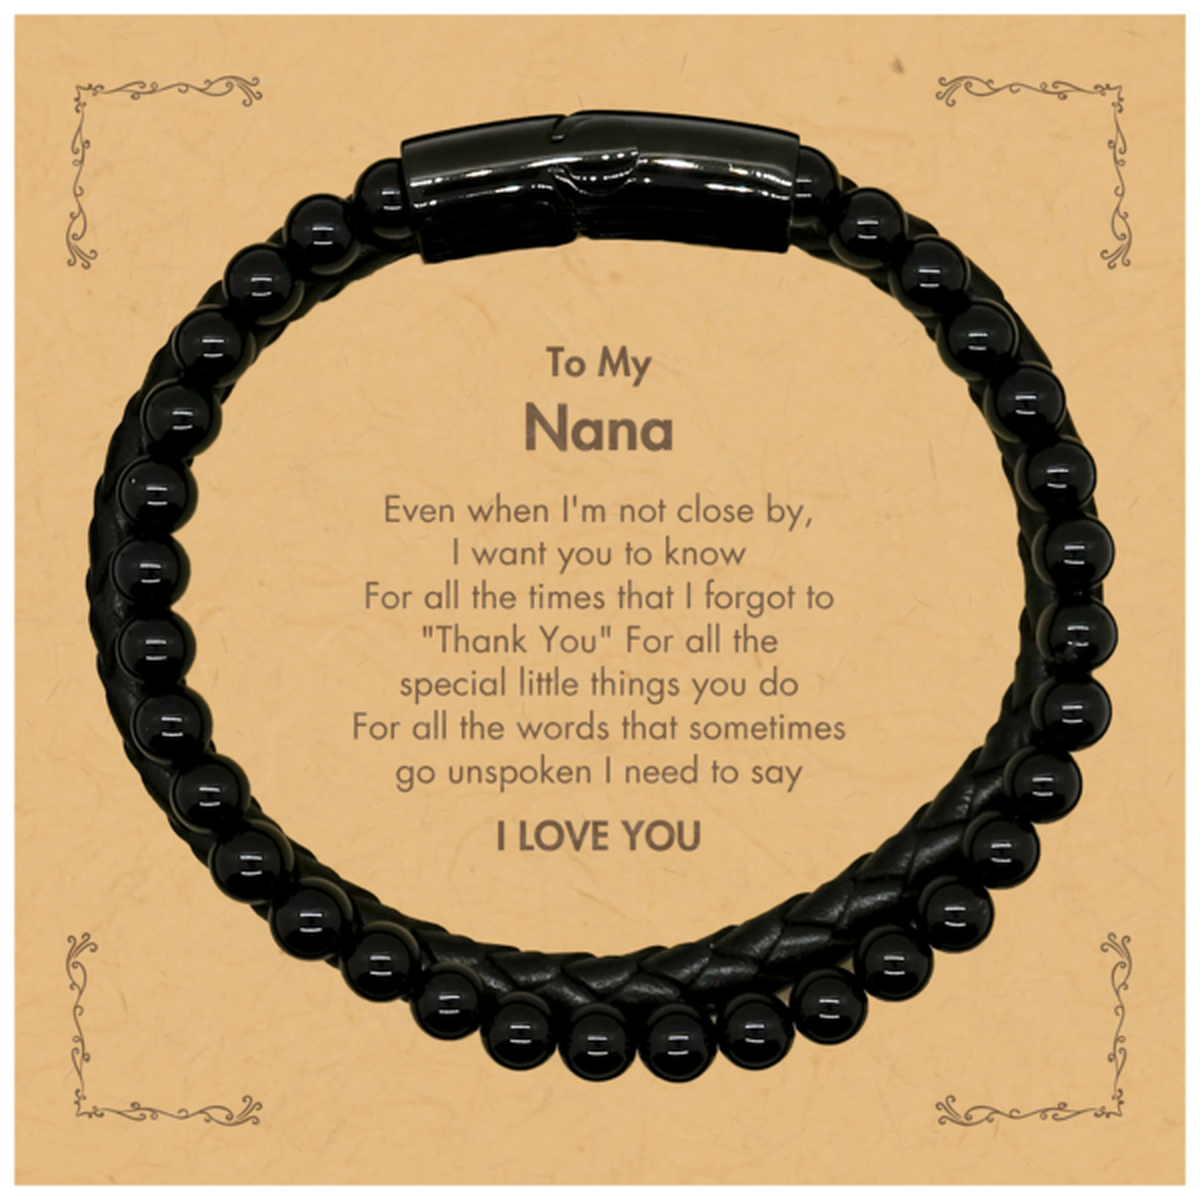 Thank You Gifts for Nana, Keepsake Stone Leather Bracelets Gifts for Nana Birthday Mother's day Father's Day Nana For all the words That sometimes go unspoken I need to say I LOVE YOU